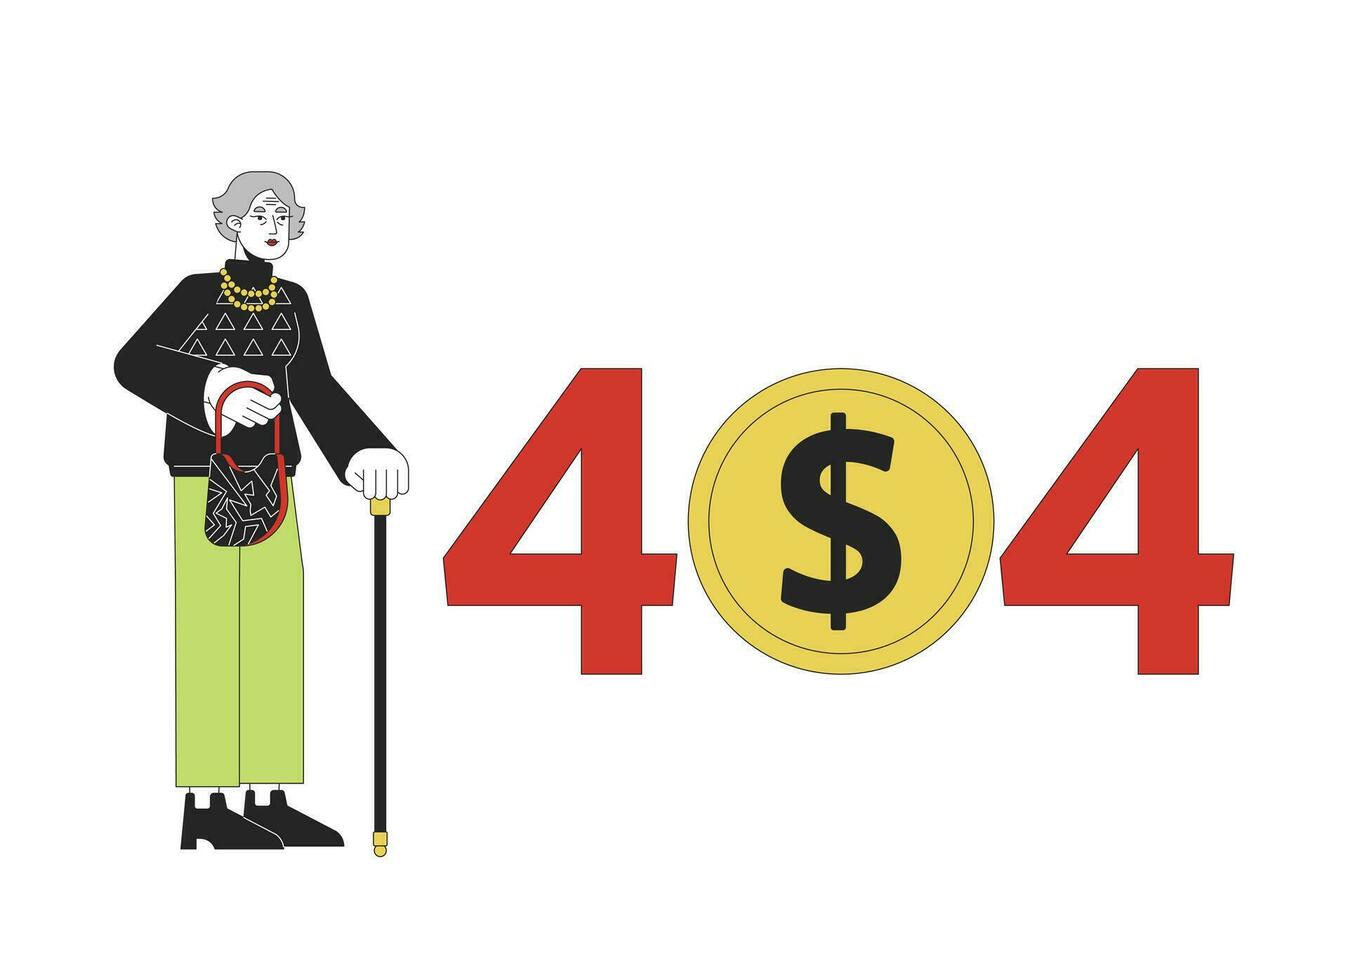 Old woman on retirement holding walking cane error 404 flash message. Pension rich. Empty state ui design. Page not found popup cartoon image. Vector flat illustration concept on white background